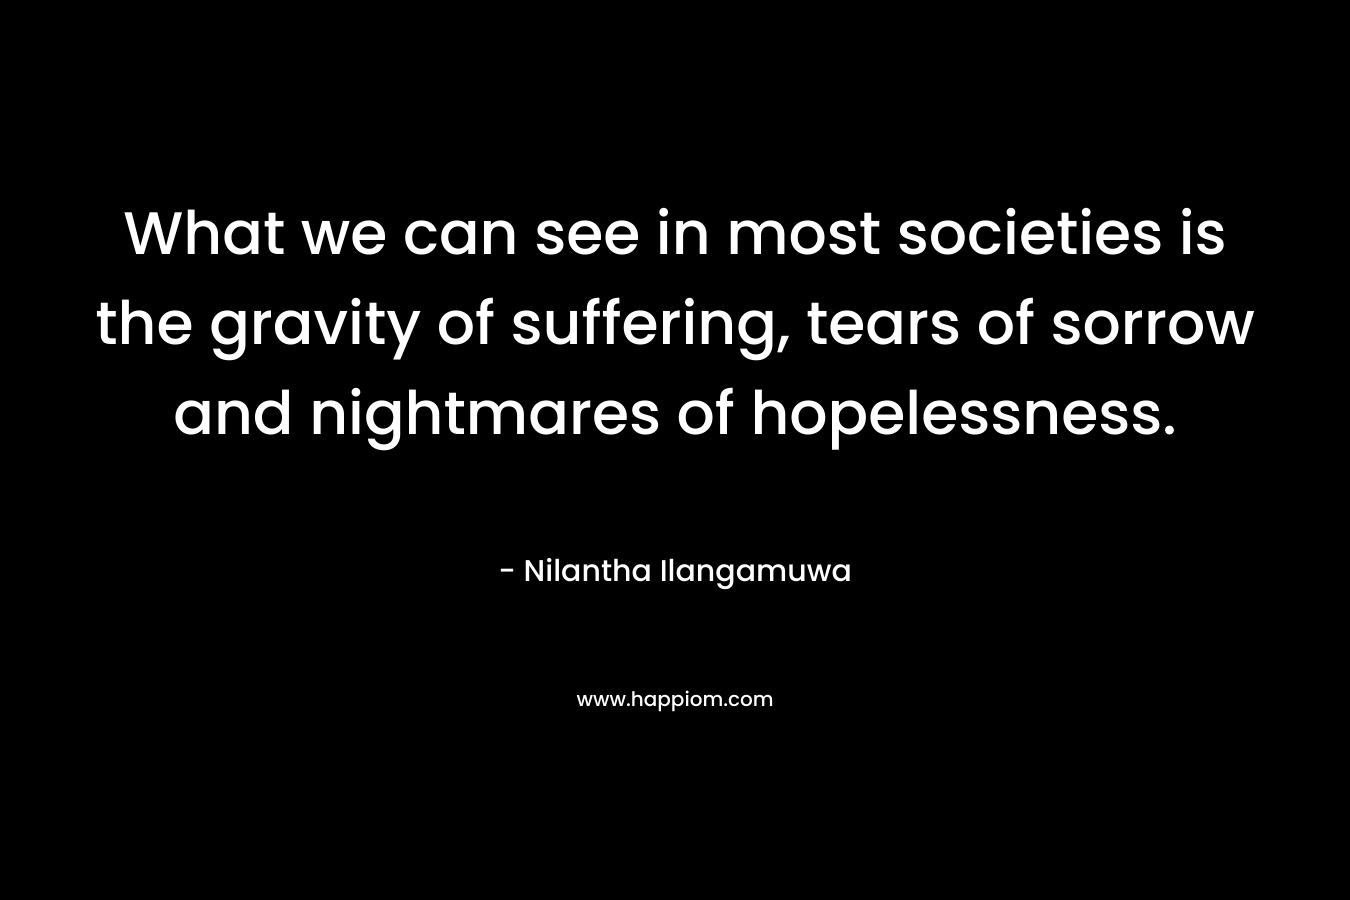 What we can see in most societies is the gravity of suffering, tears of sorrow and nightmares of hopelessness. – Nilantha Ilangamuwa